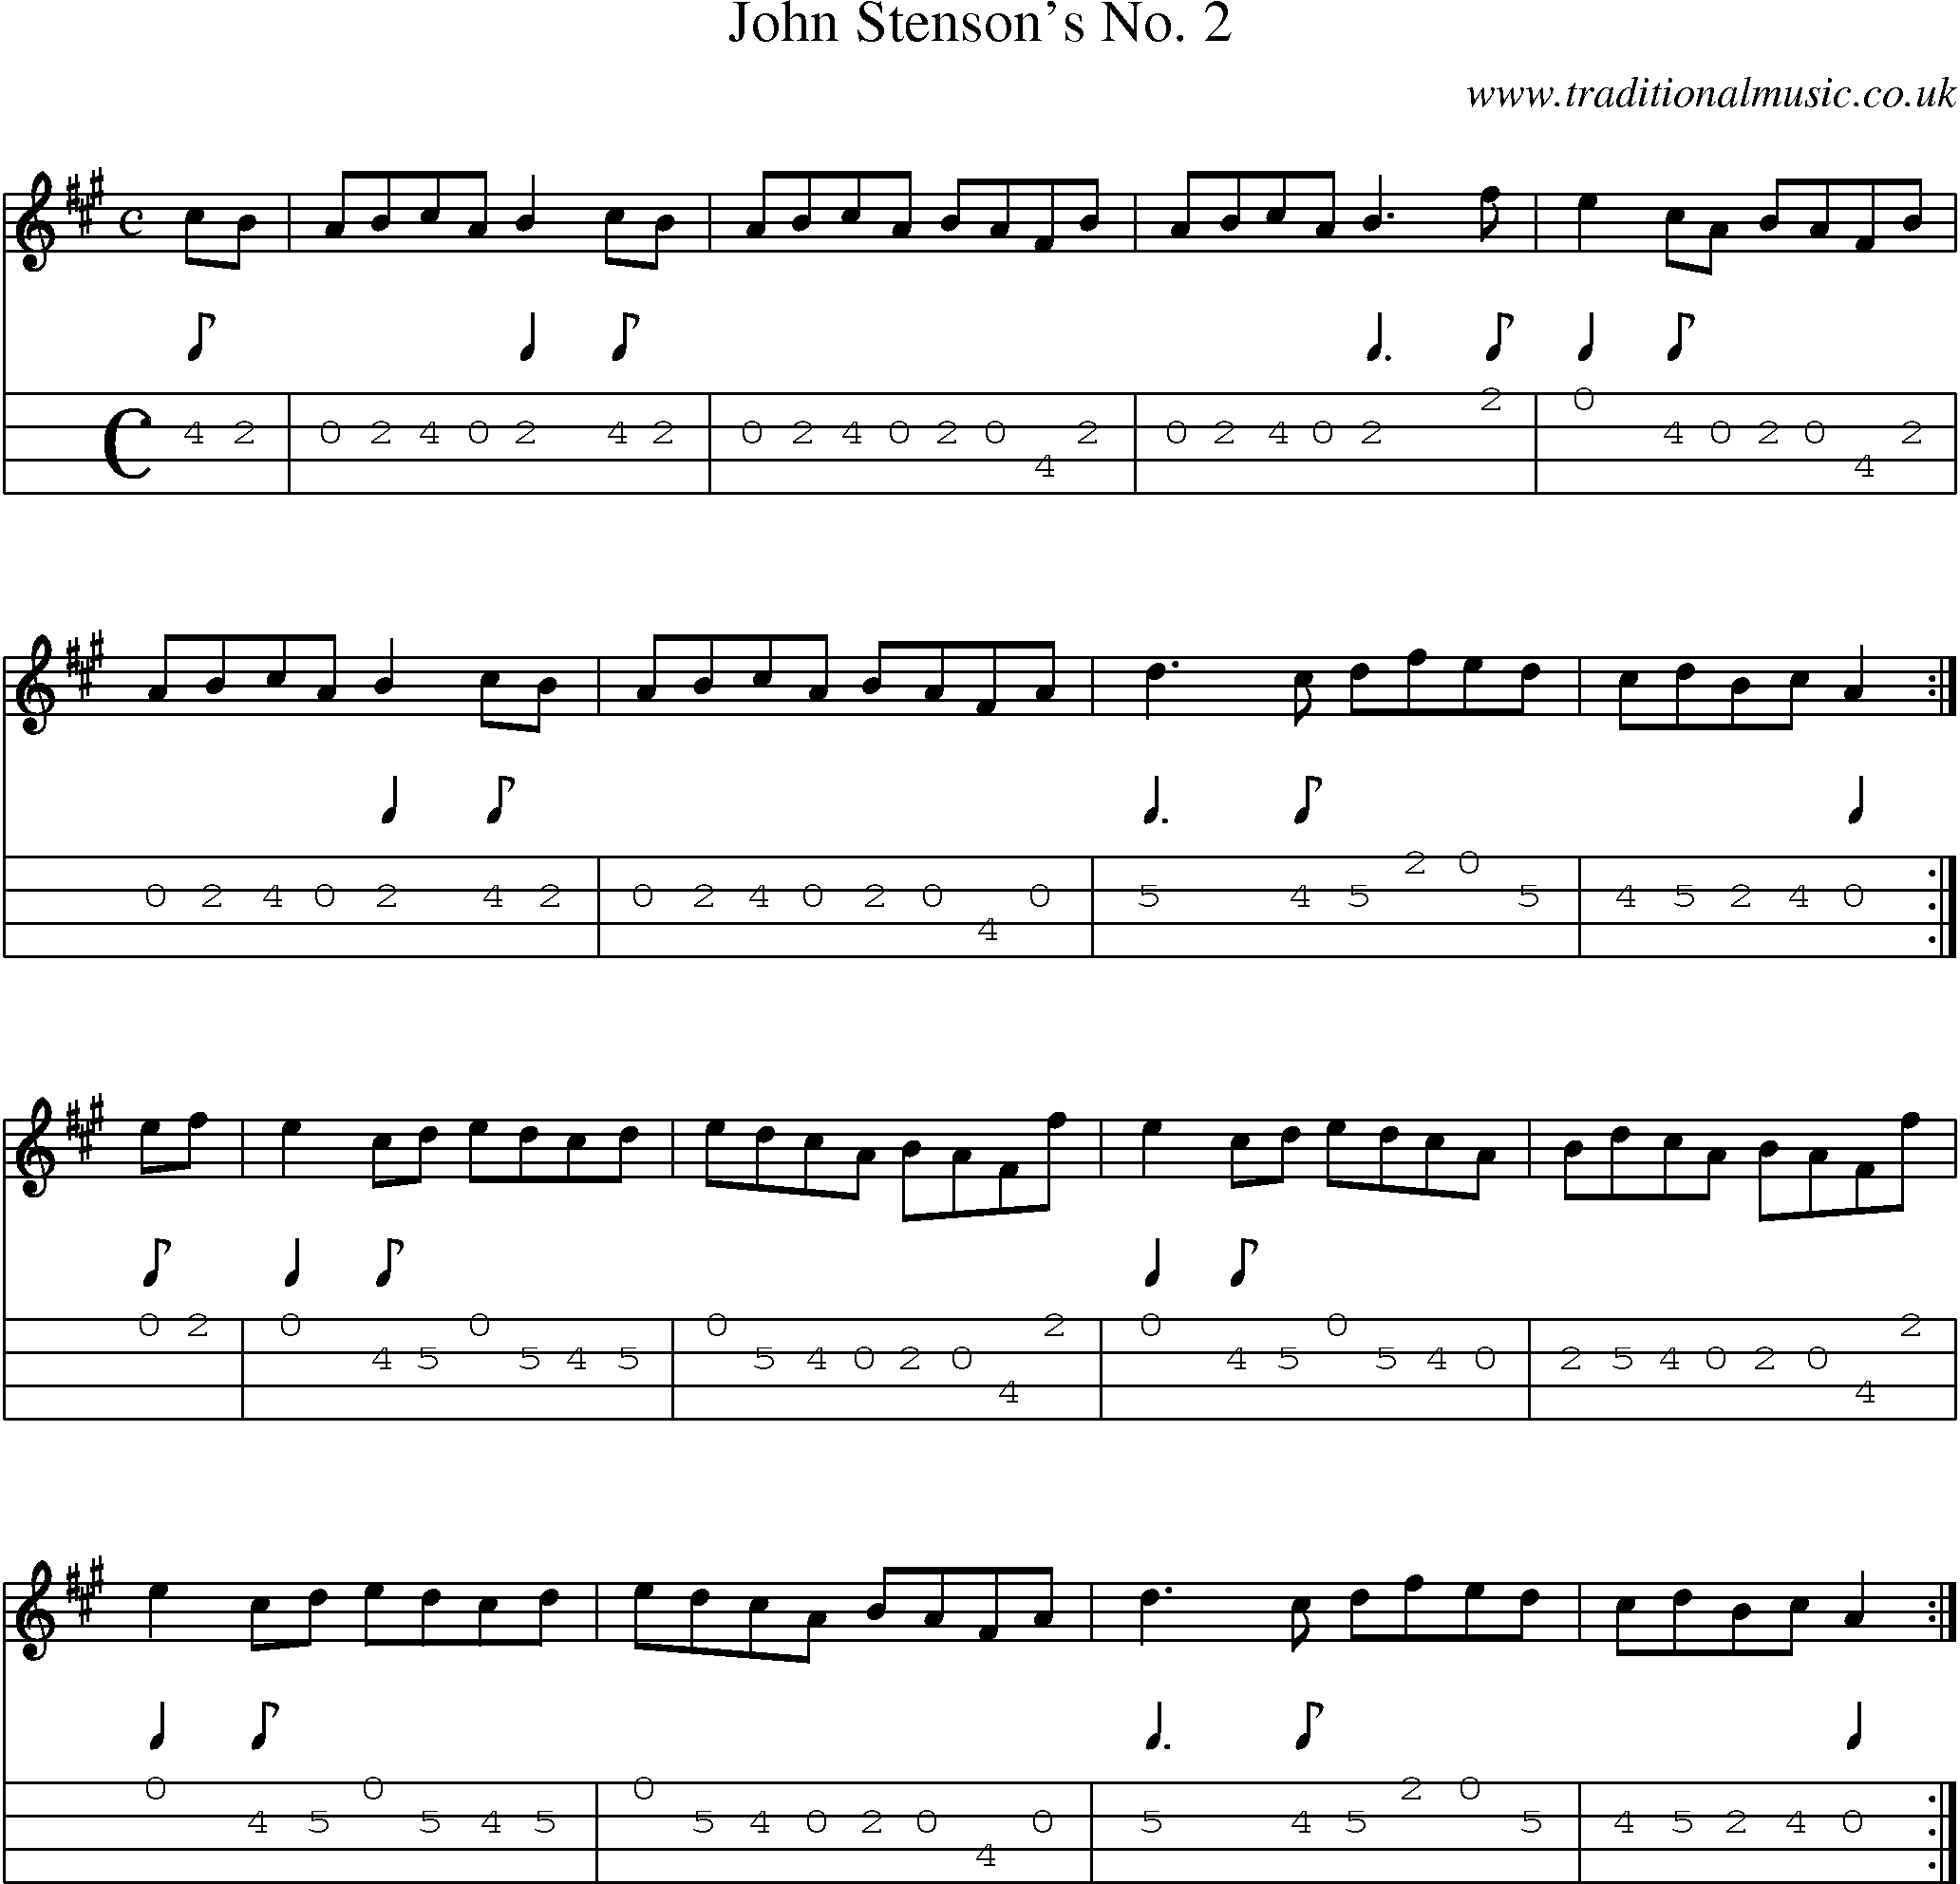 Music Score and Mandolin Tabs for John Stensons No 2